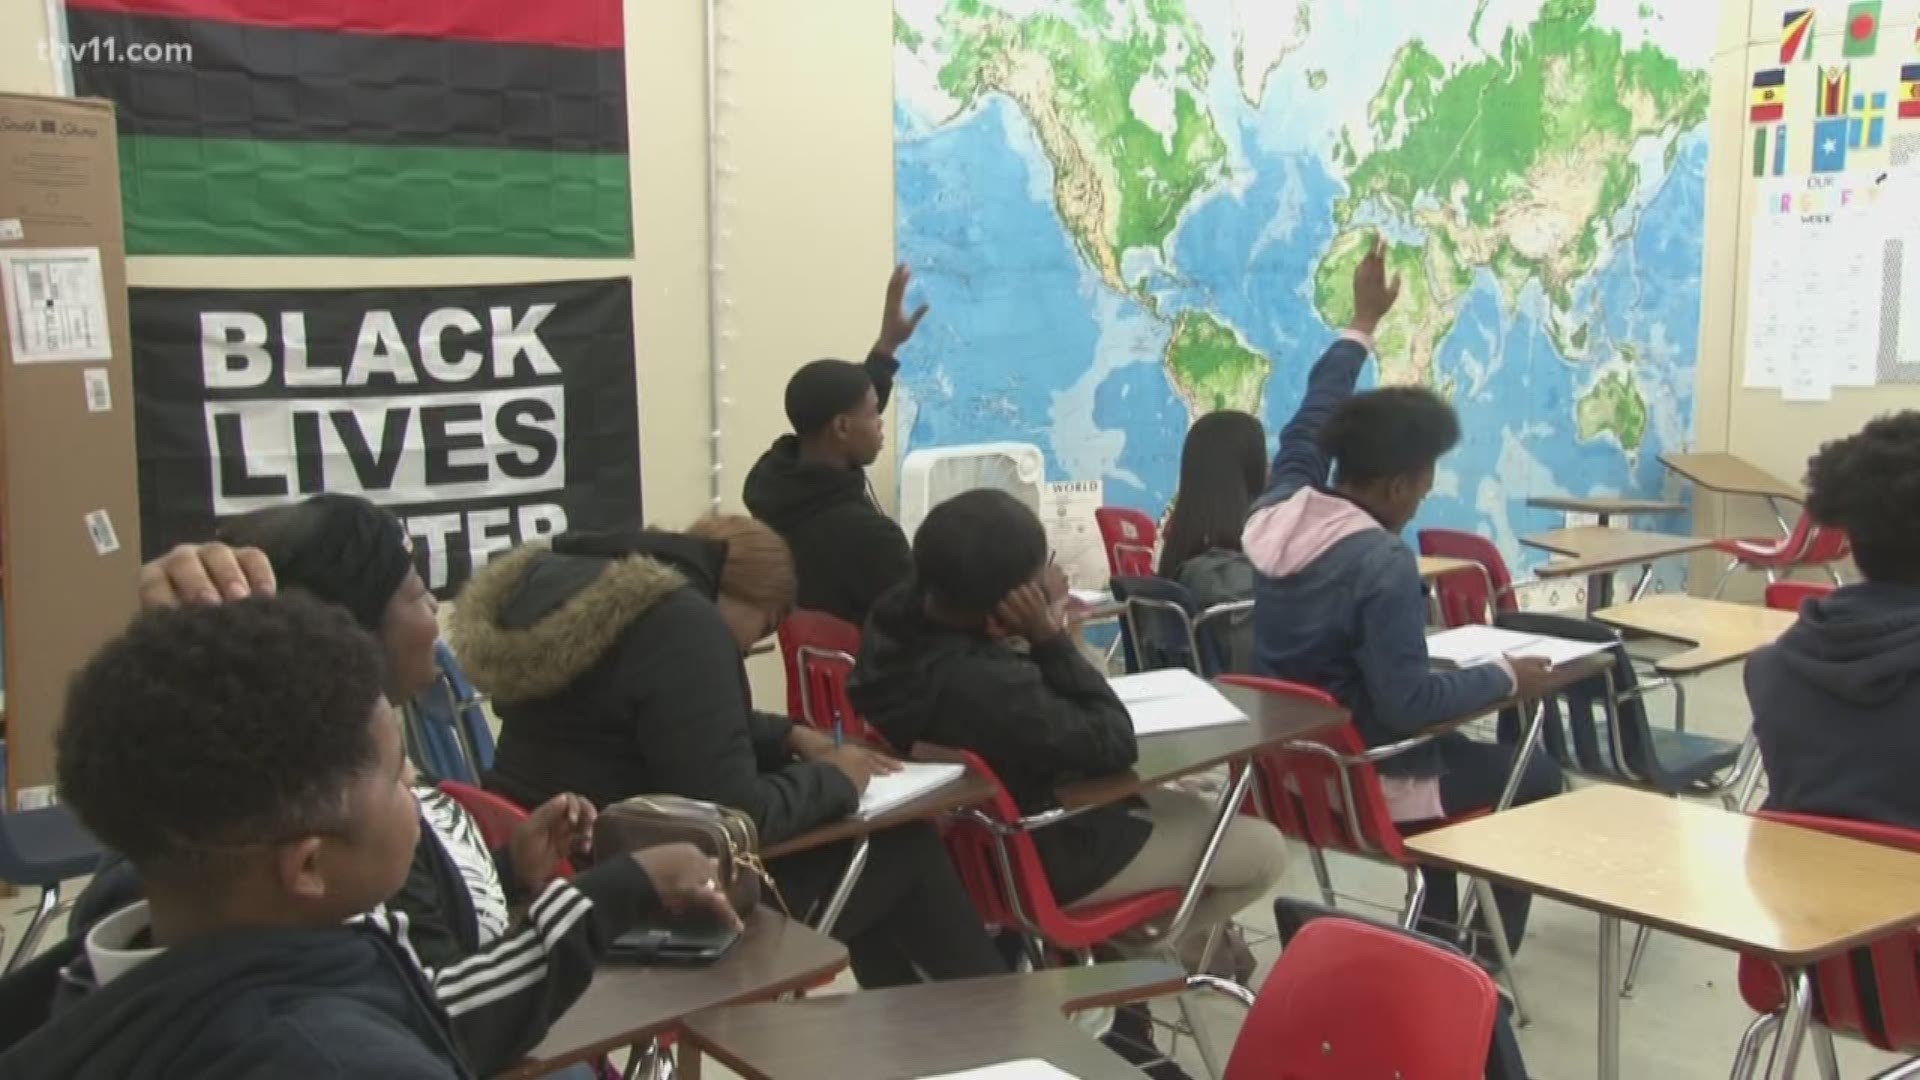 With 400 years of African America history, many students are learning the minimal amount of a bigger story. Pine Bluff school are teaching some incredible history.